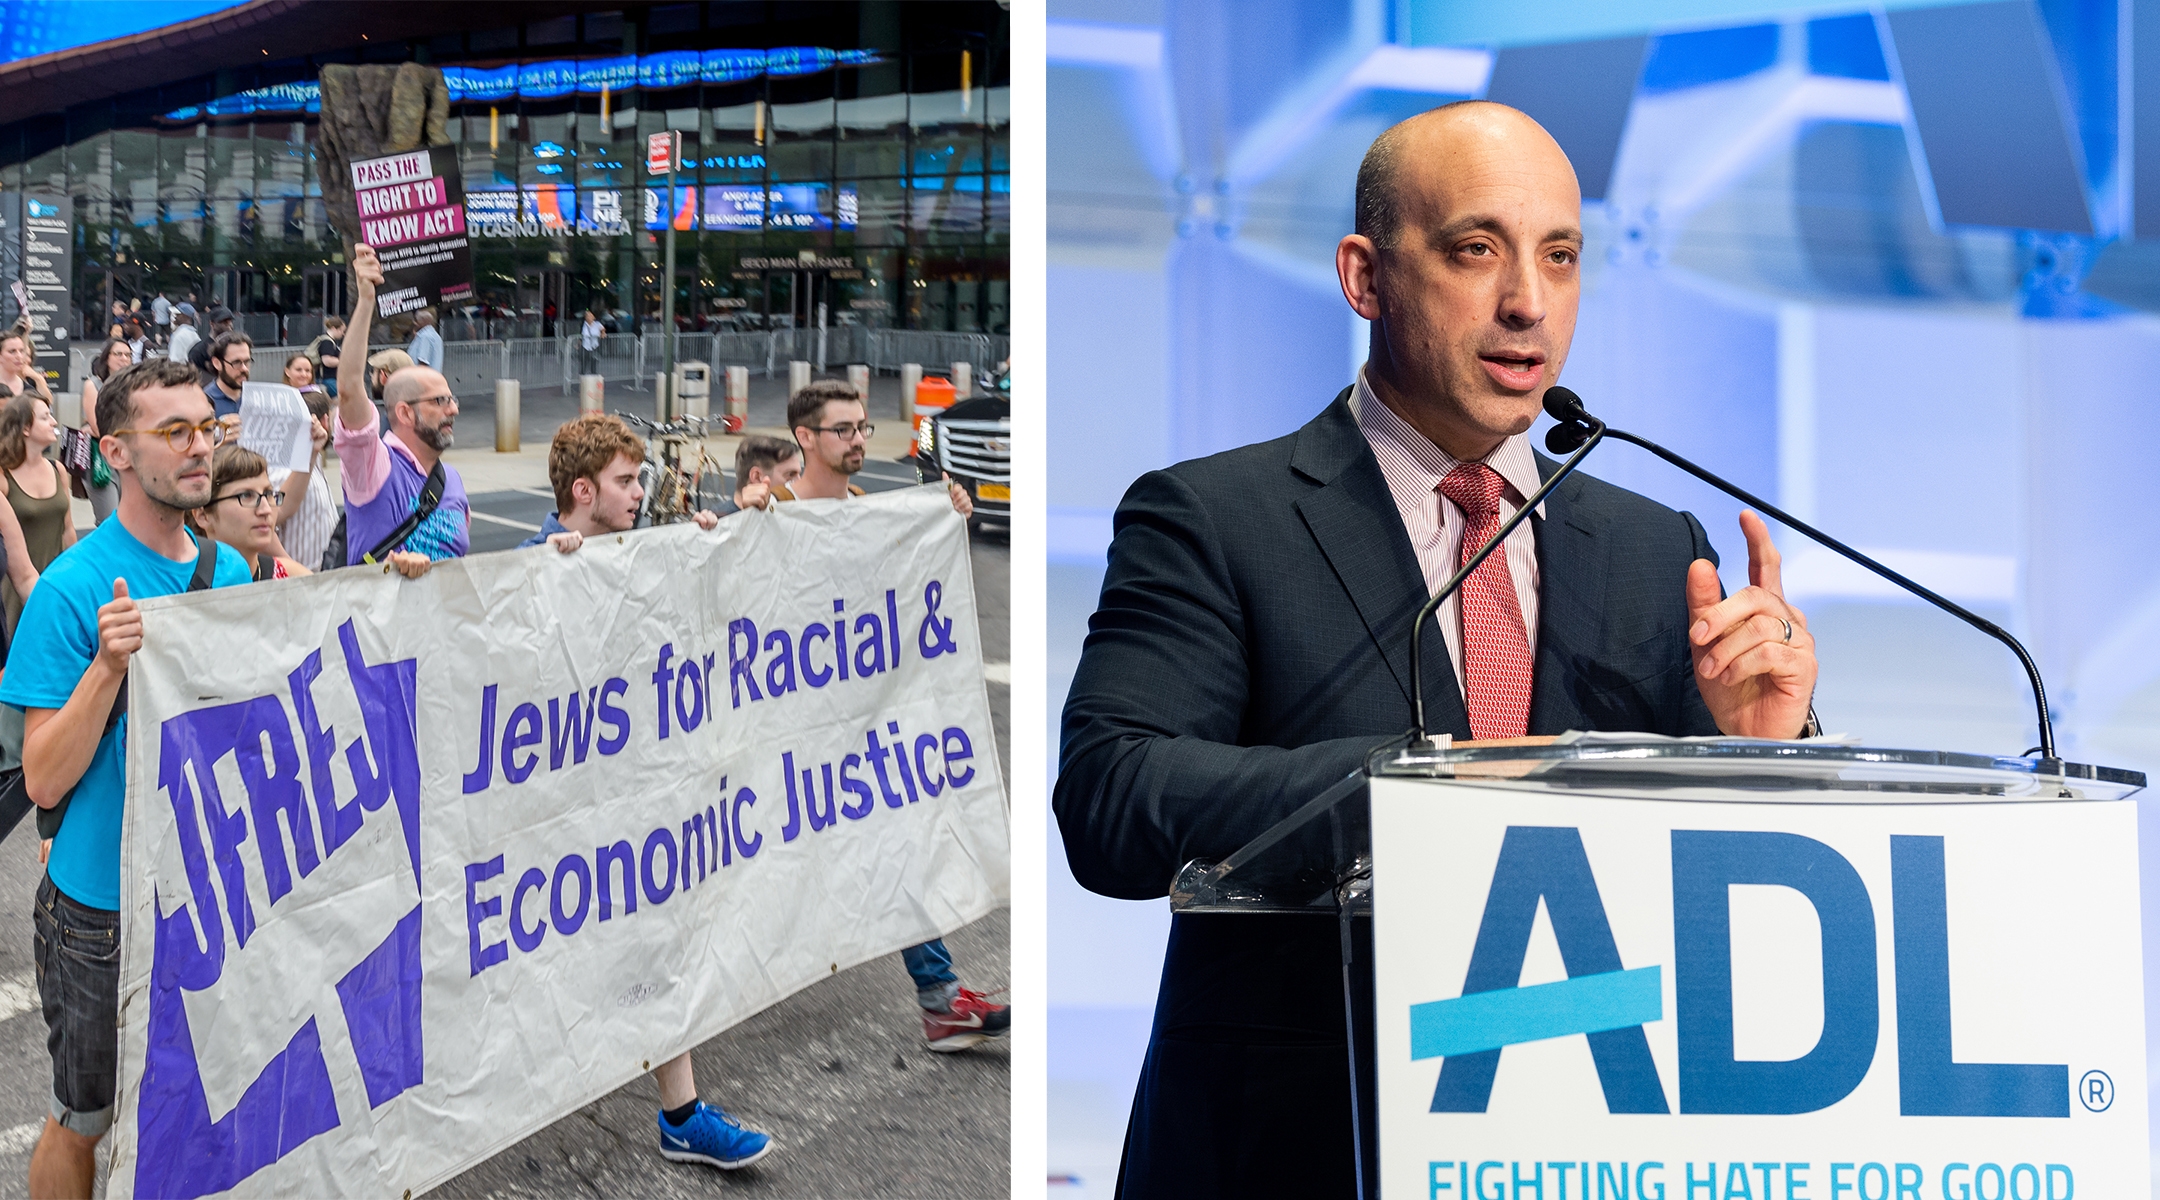 ADL condemns NY progressive group Jews for Racial & Economic Justice as ‘out of touch’